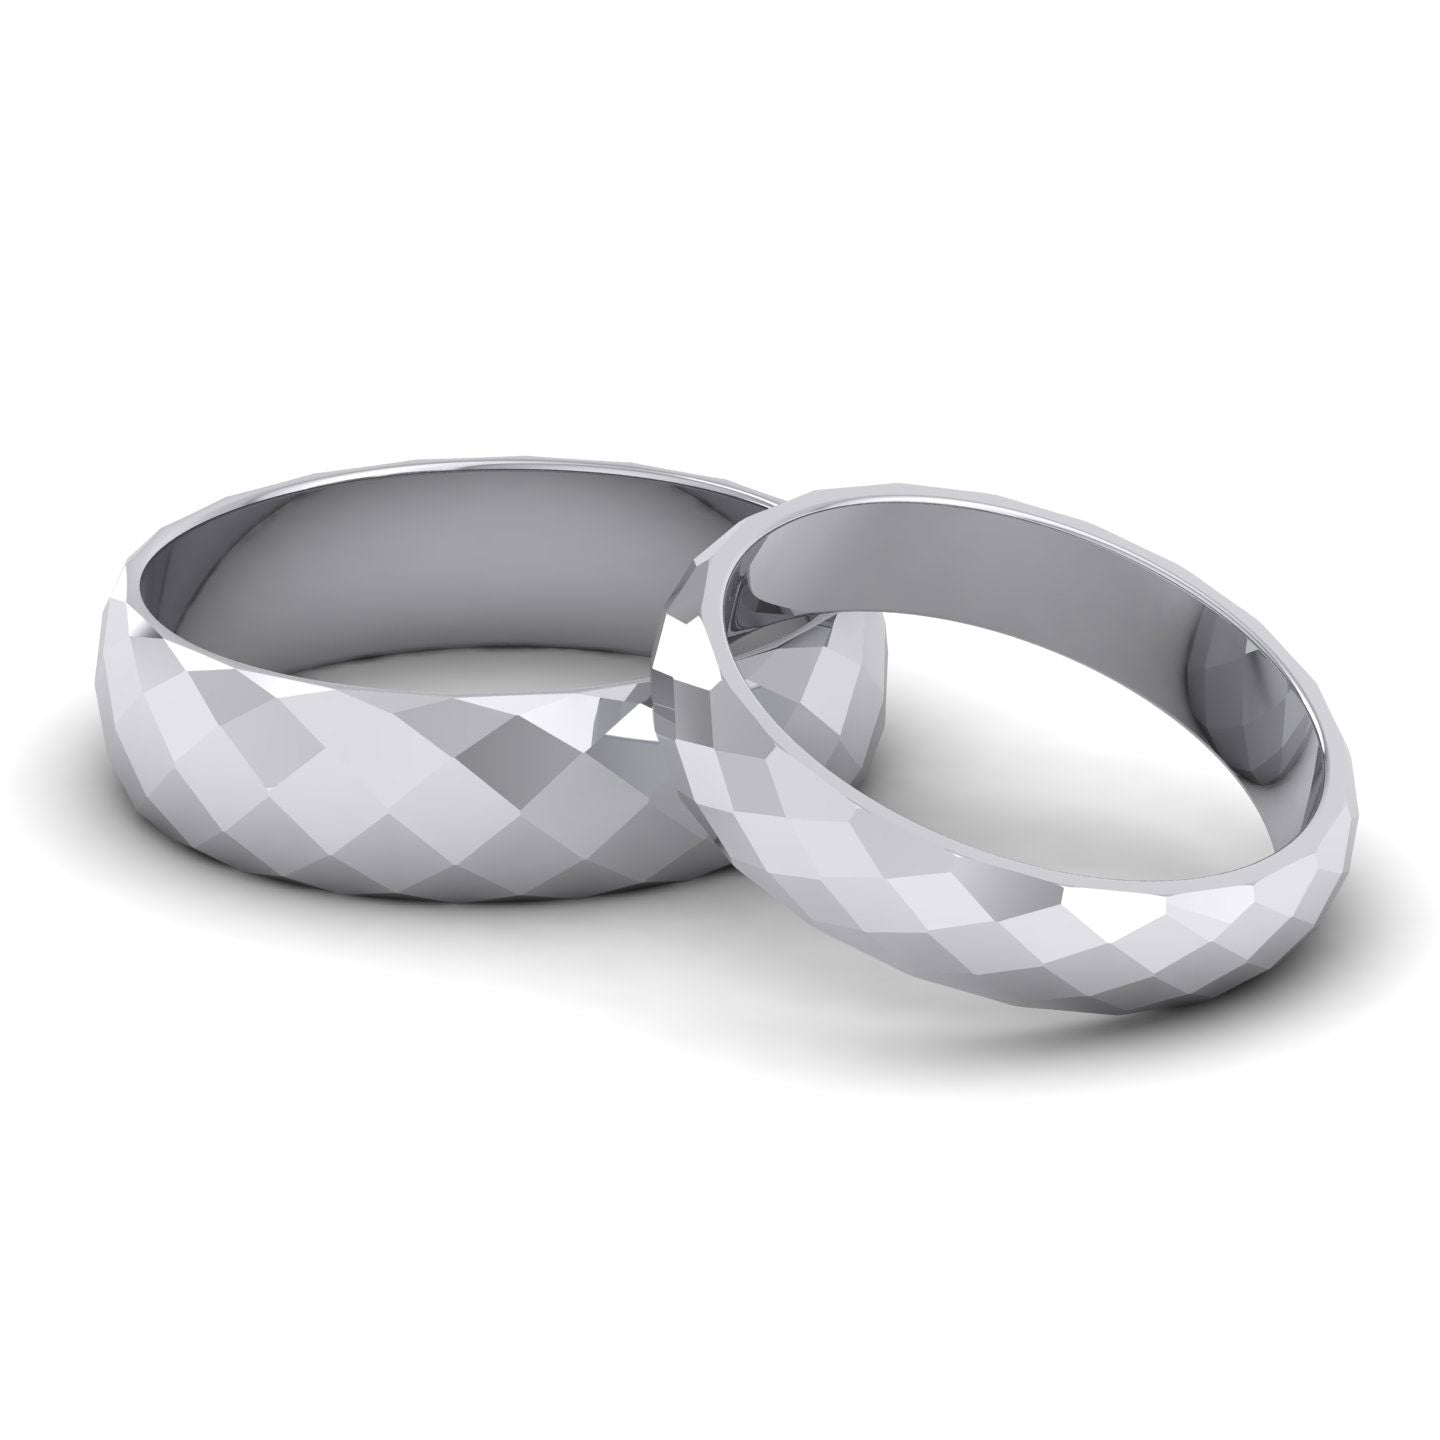 Facetted Harlequin Design 14ct White Gold 6mm Wedding Ring